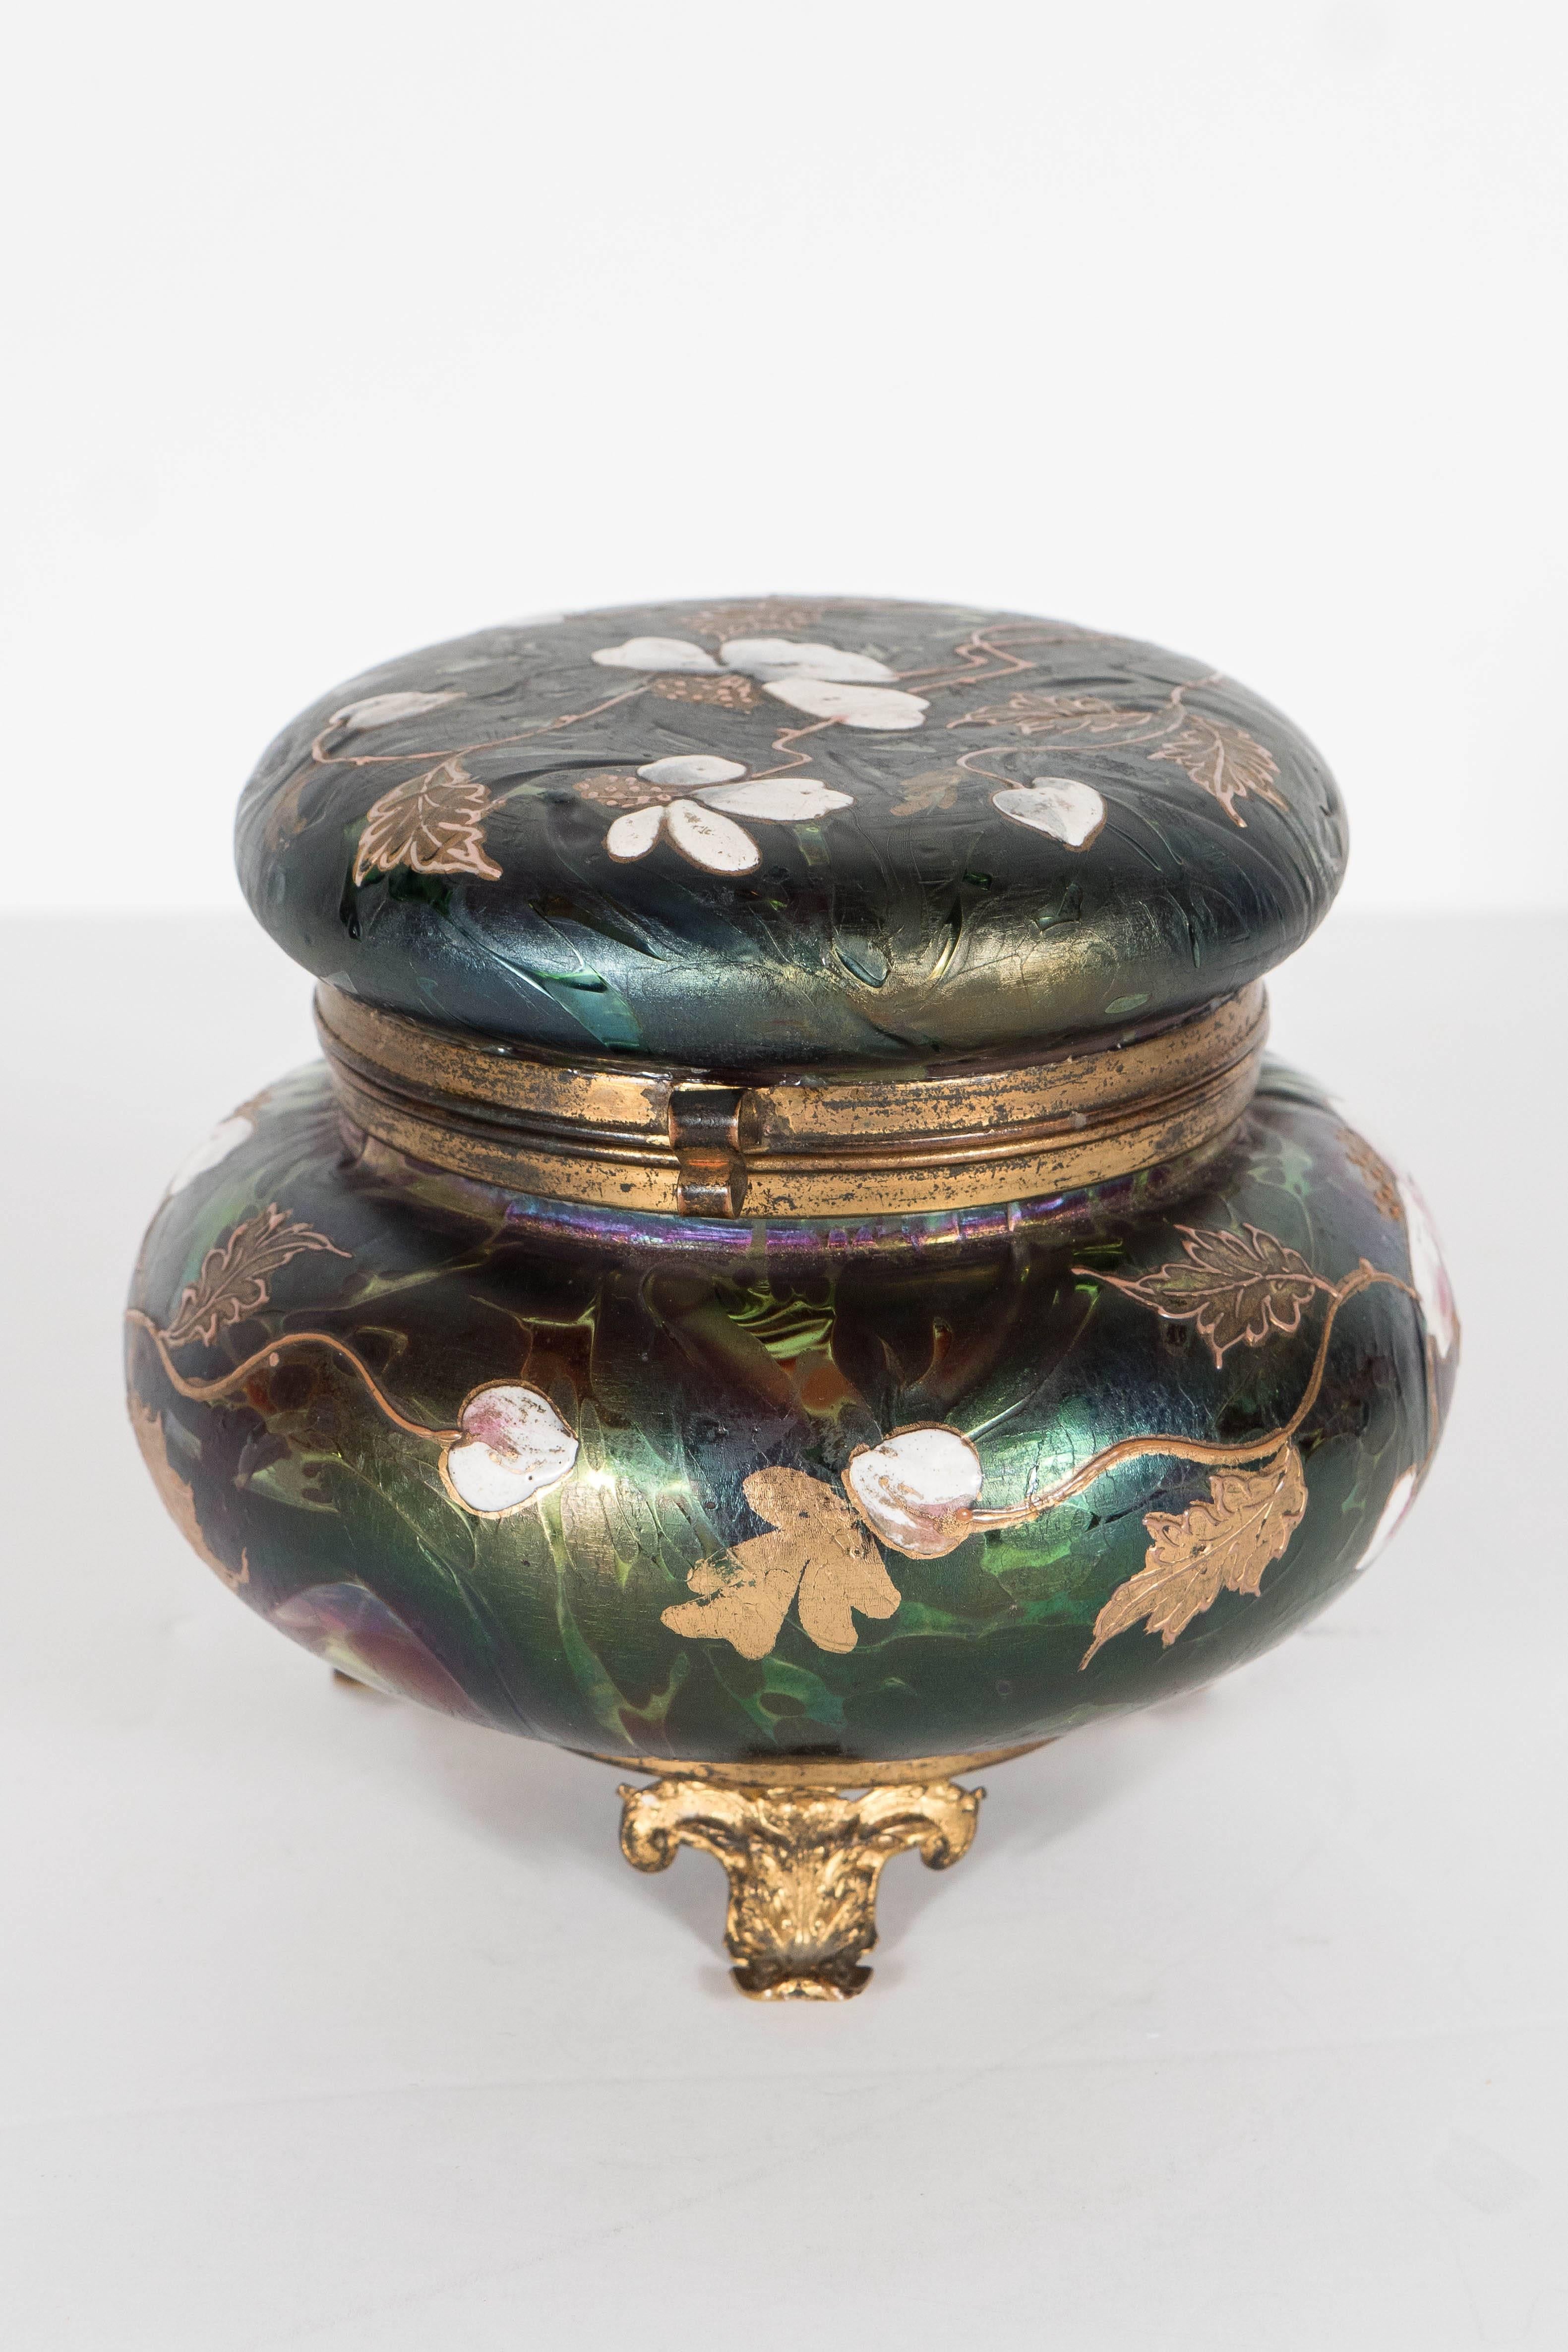 This elegant and exquisite box features a gilt base  and hinged lid with all hand painted glass with a relief scrolling floral design.  This can be used as a decorative object or functional as well. Would be great on a vanity table or a a decorative